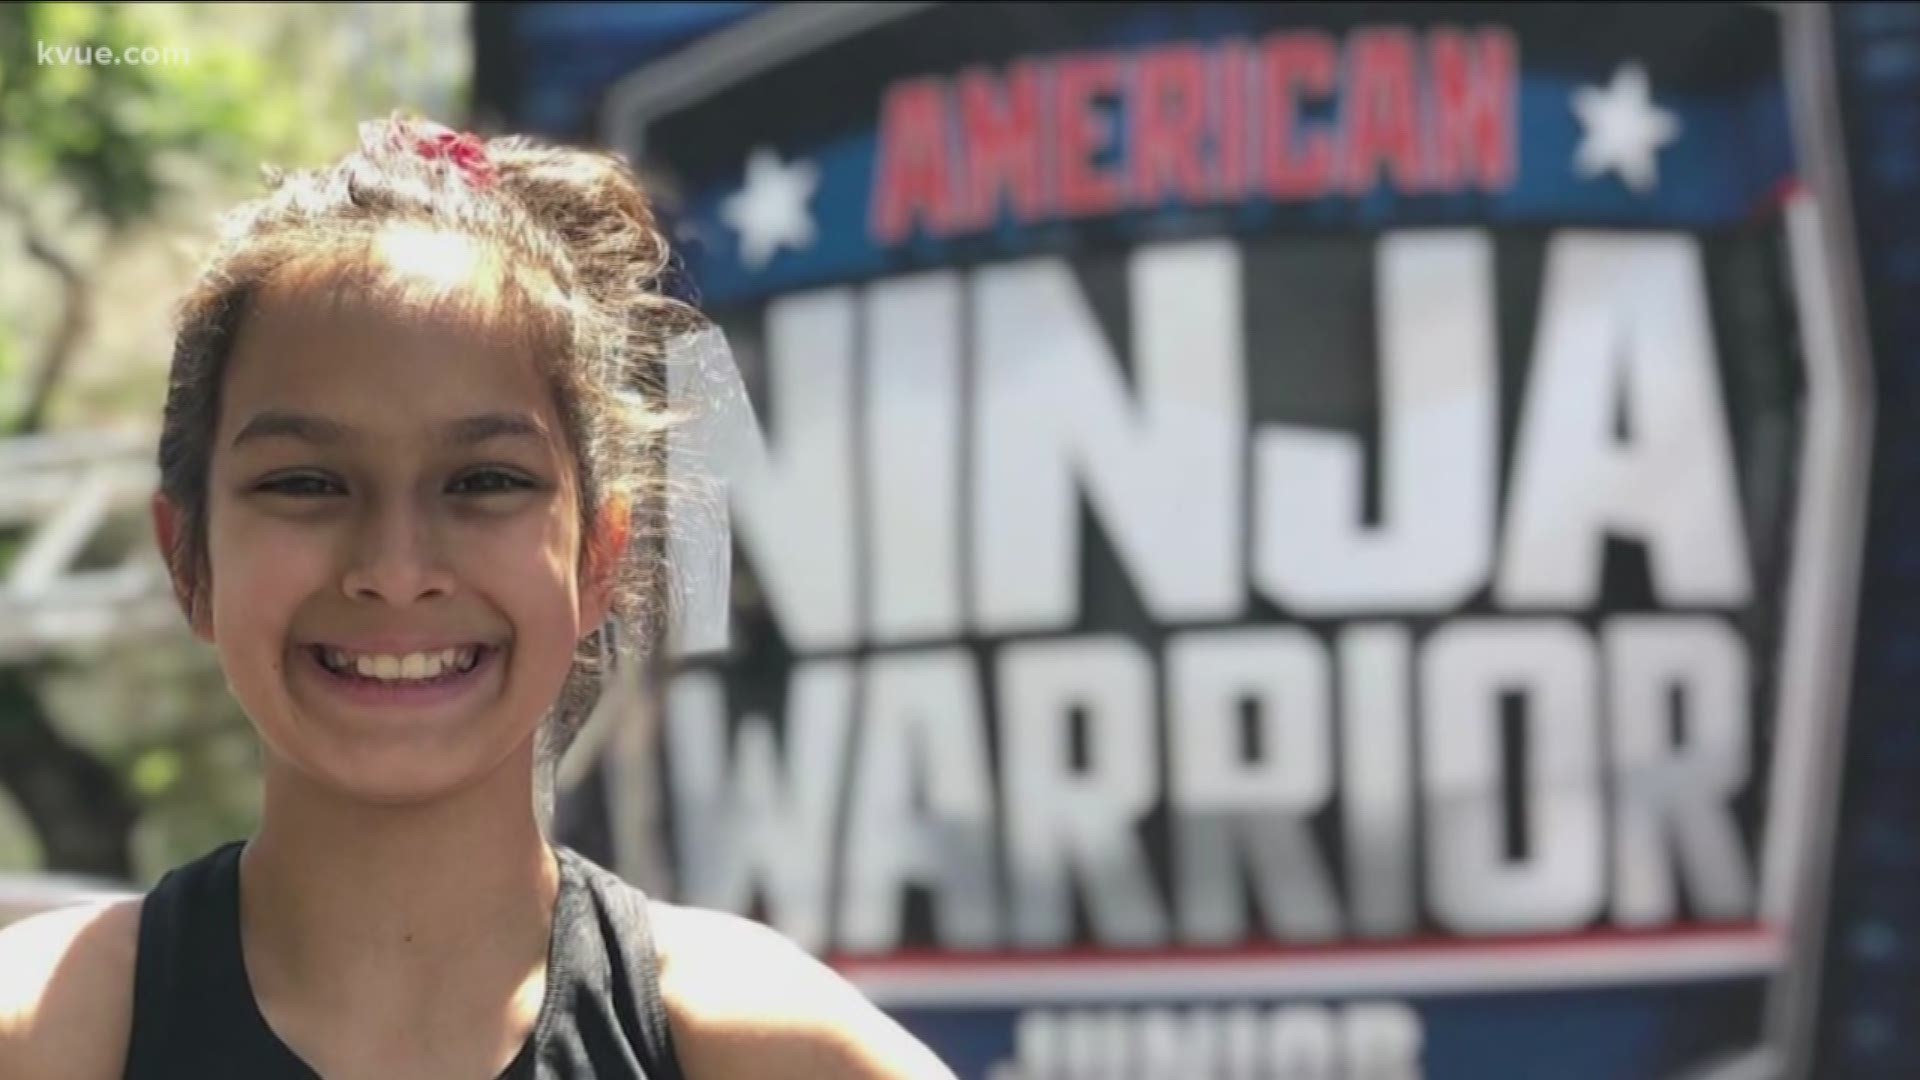 An actress and acrobat, 12-year-old Lexi Vasquez is no stranger to the spotlight.